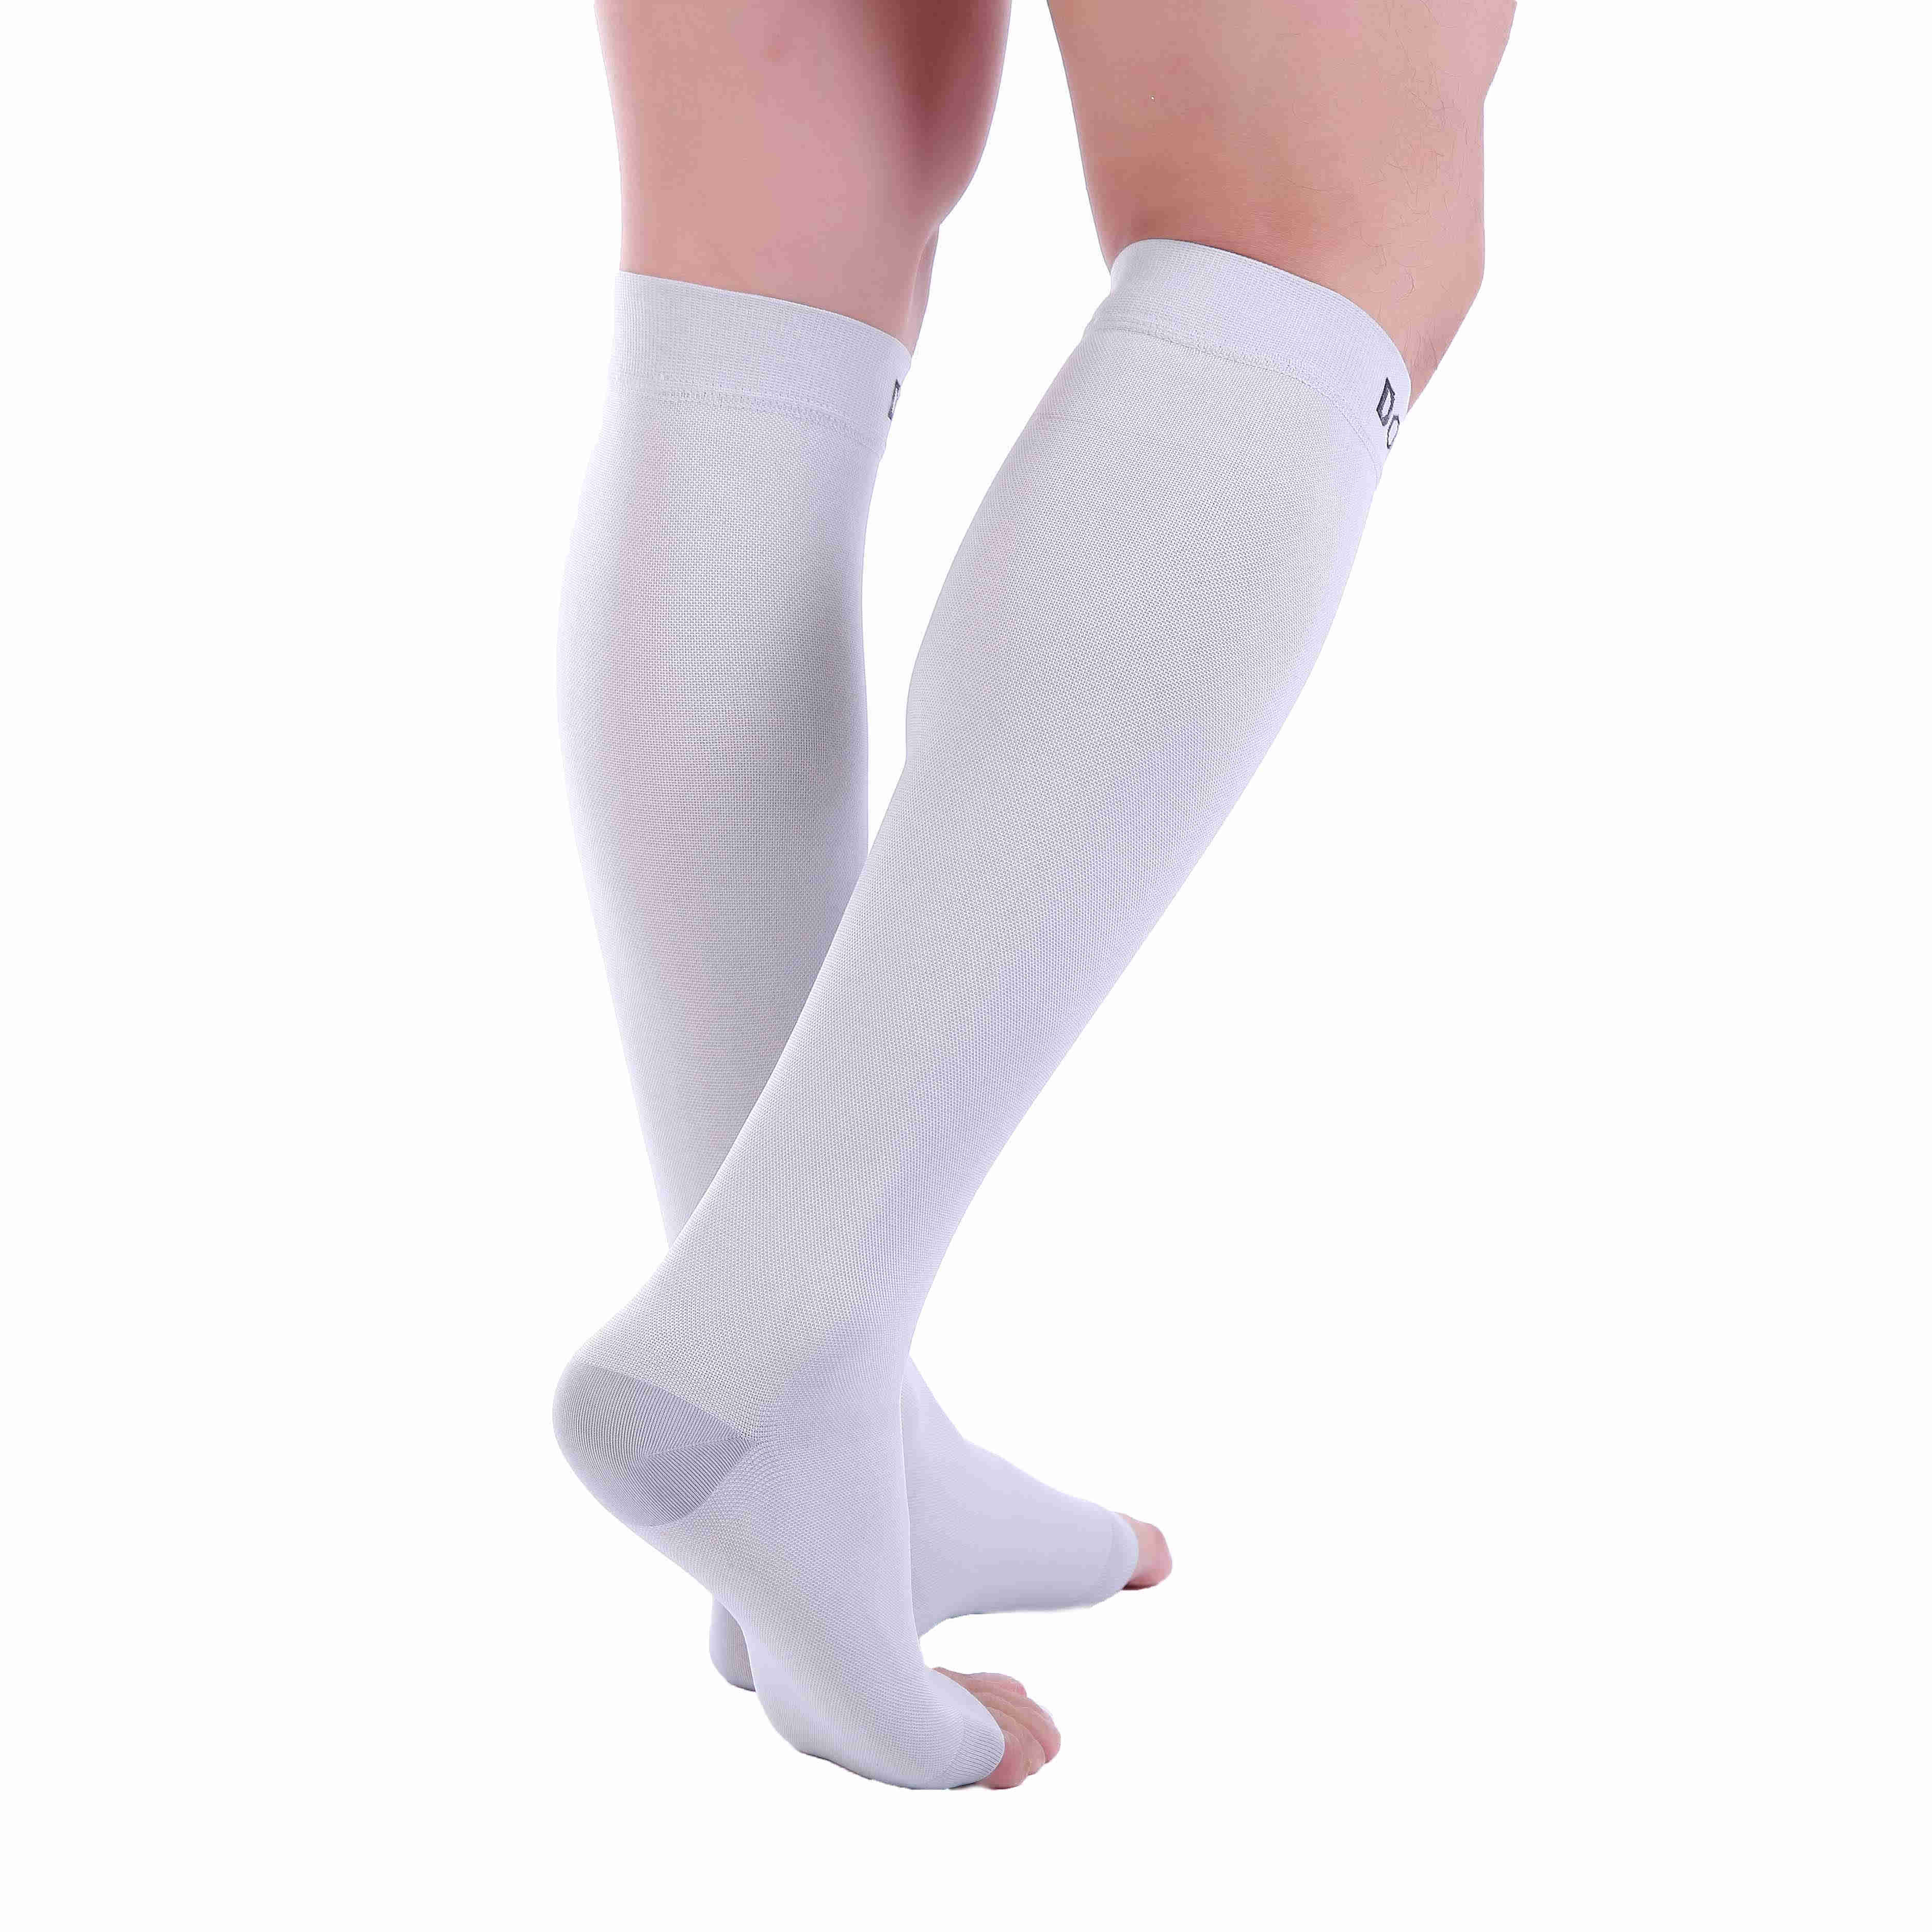 Collection of Calf Compression Sleeves Online - Doc Miller – Tagged 